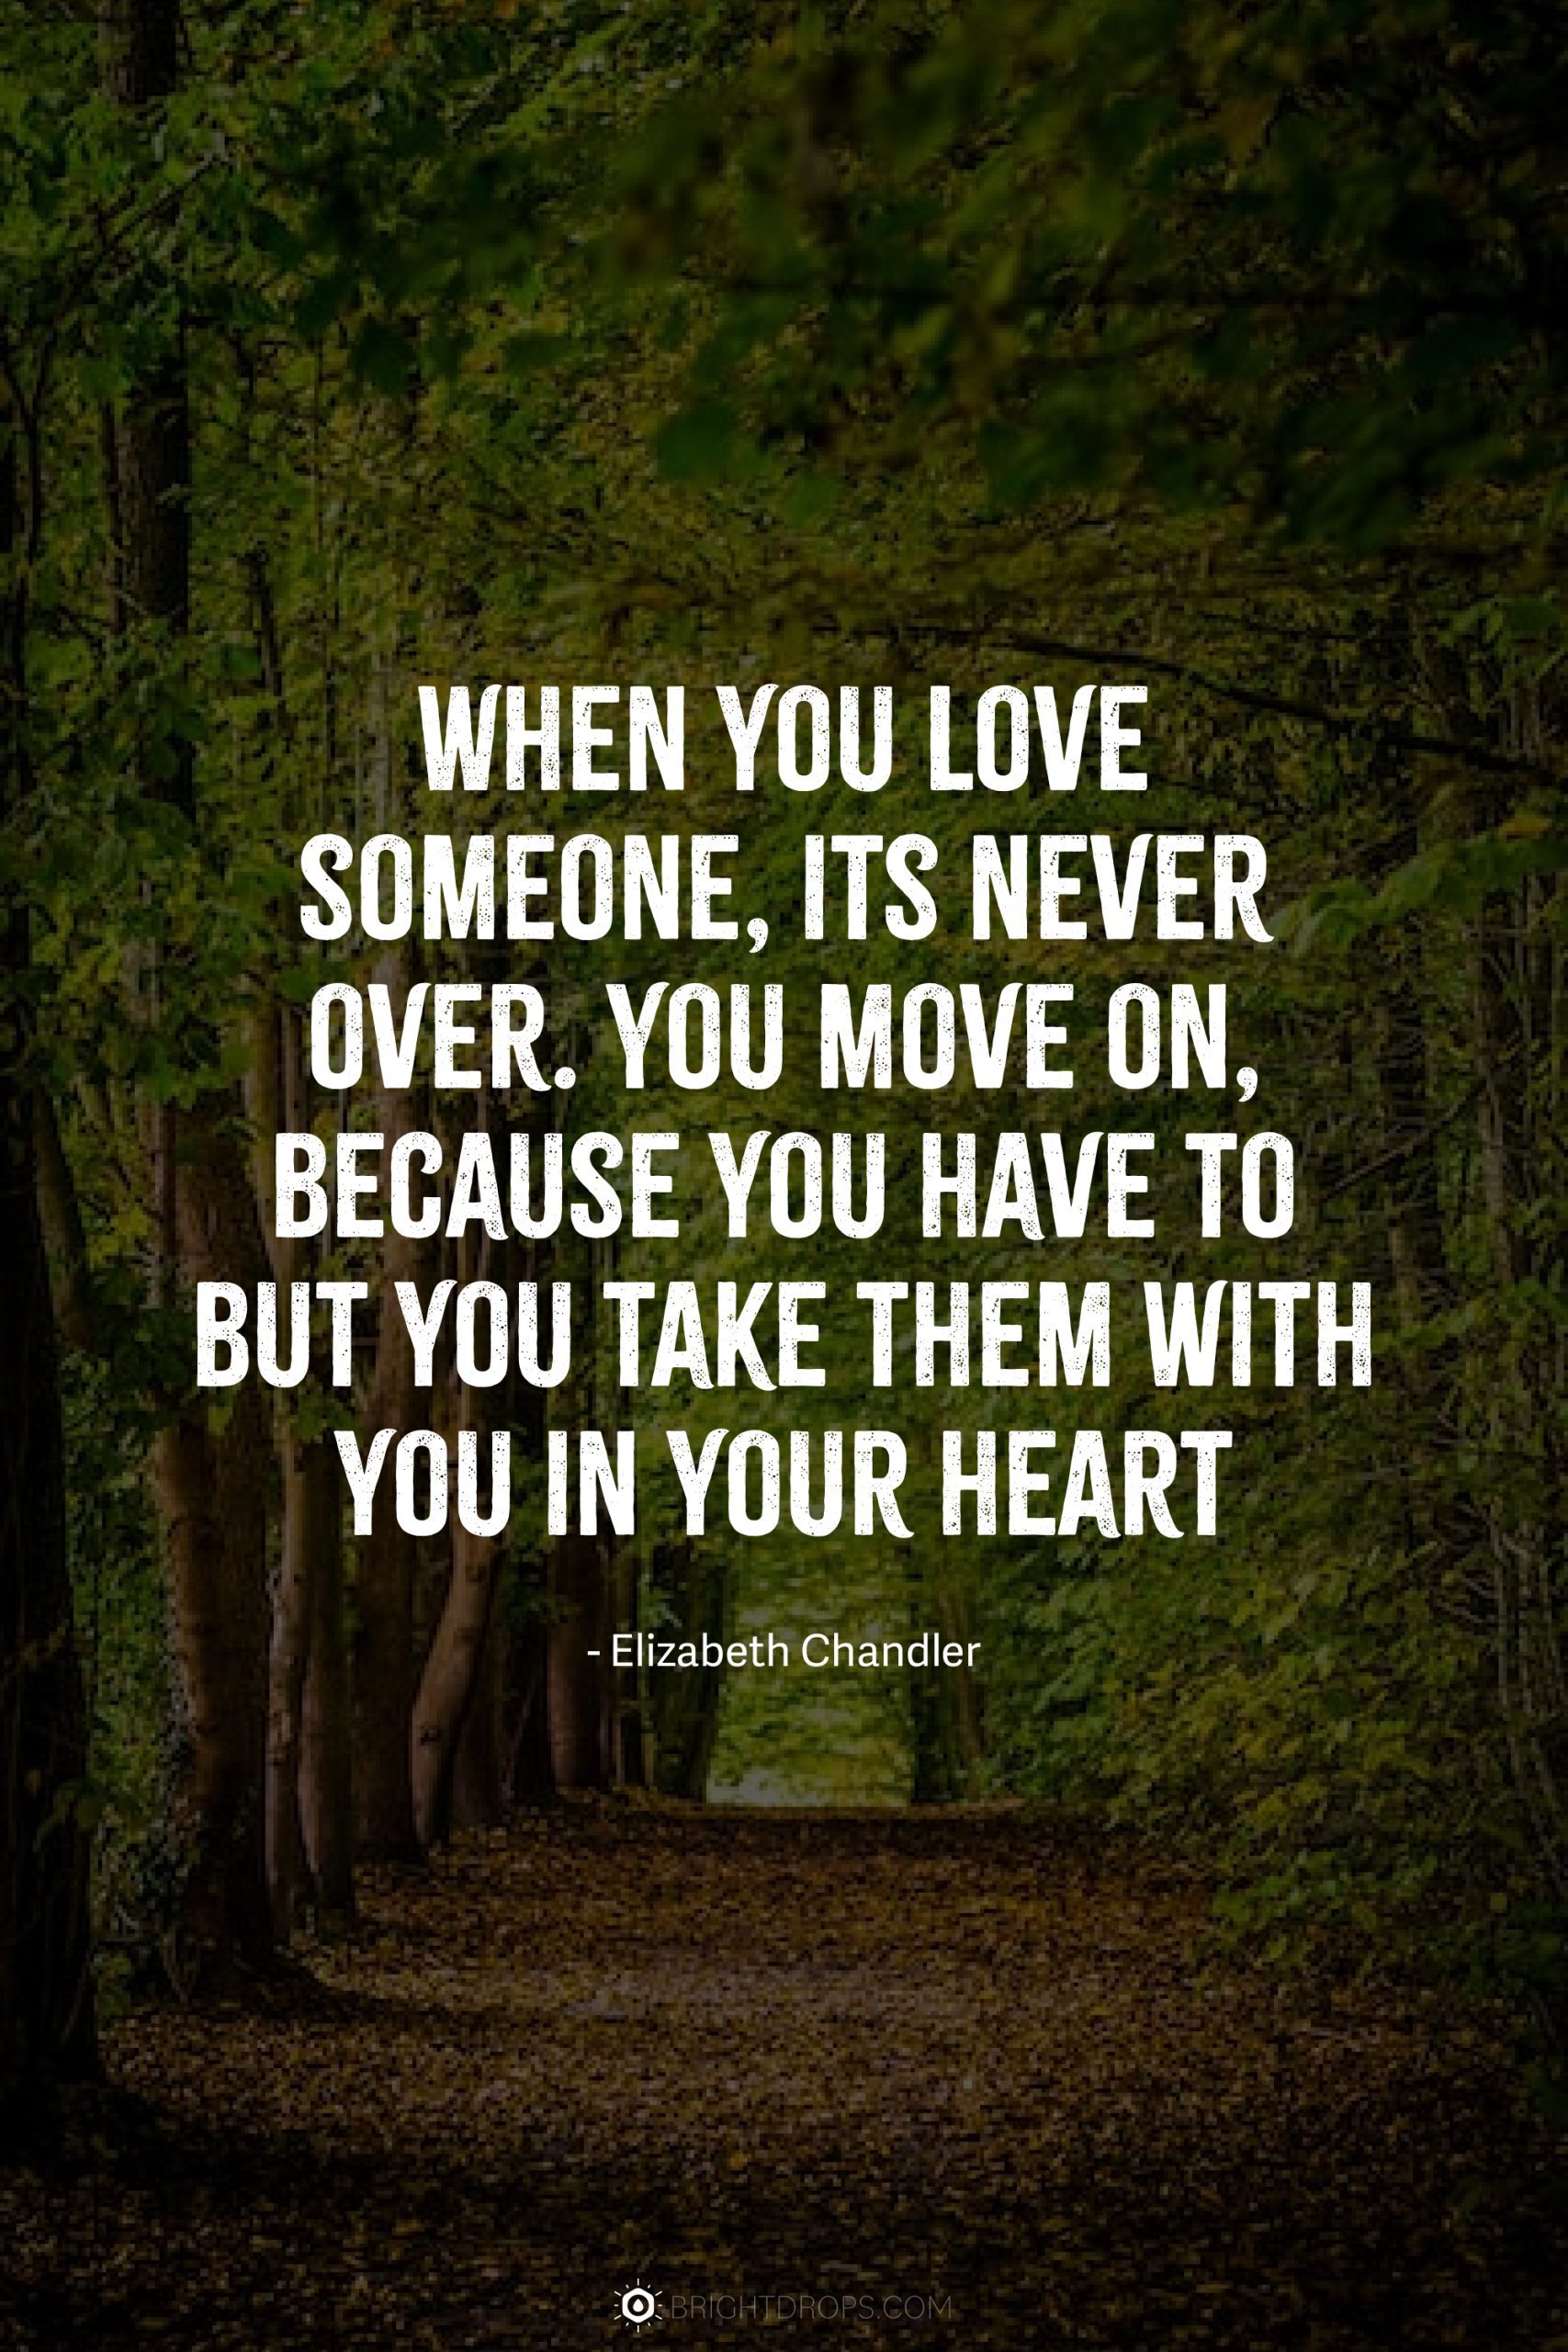 When you love someone, its never over. You move on, because you have to but you take them with you in your heart